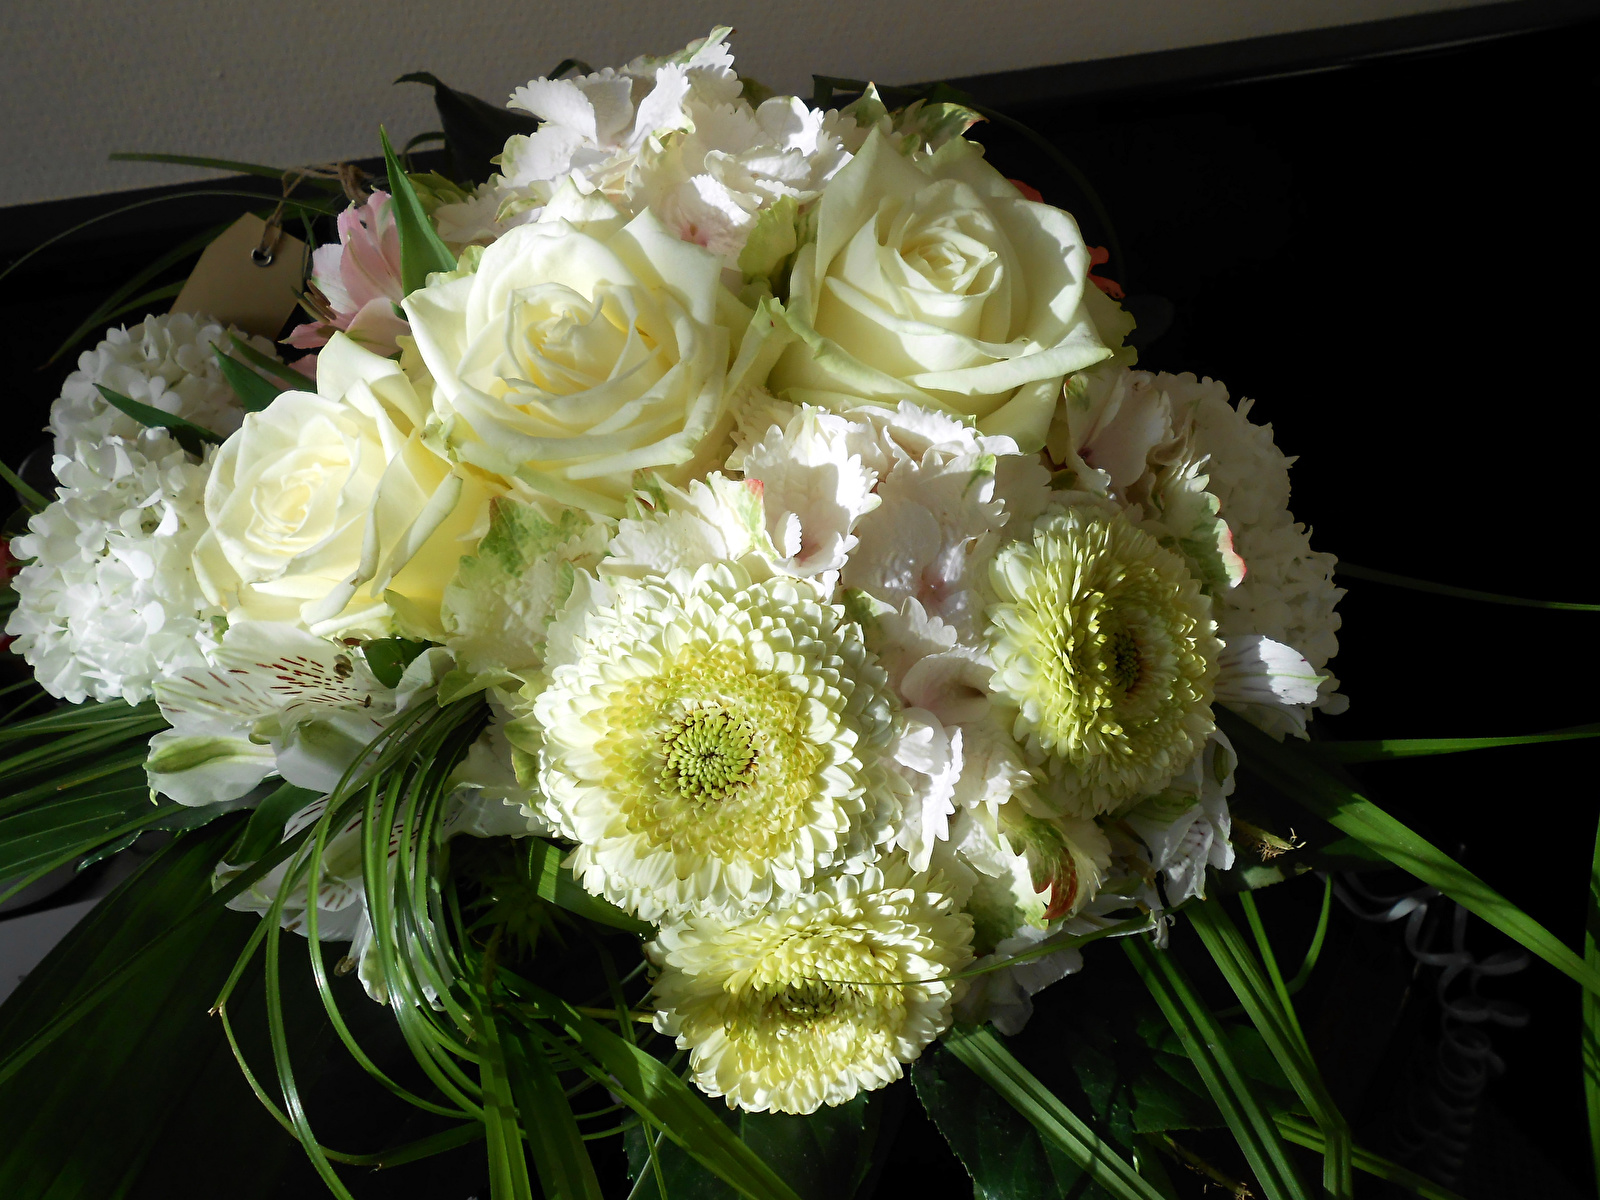 white roses with light yellow dahlias, added sprigs of greenery